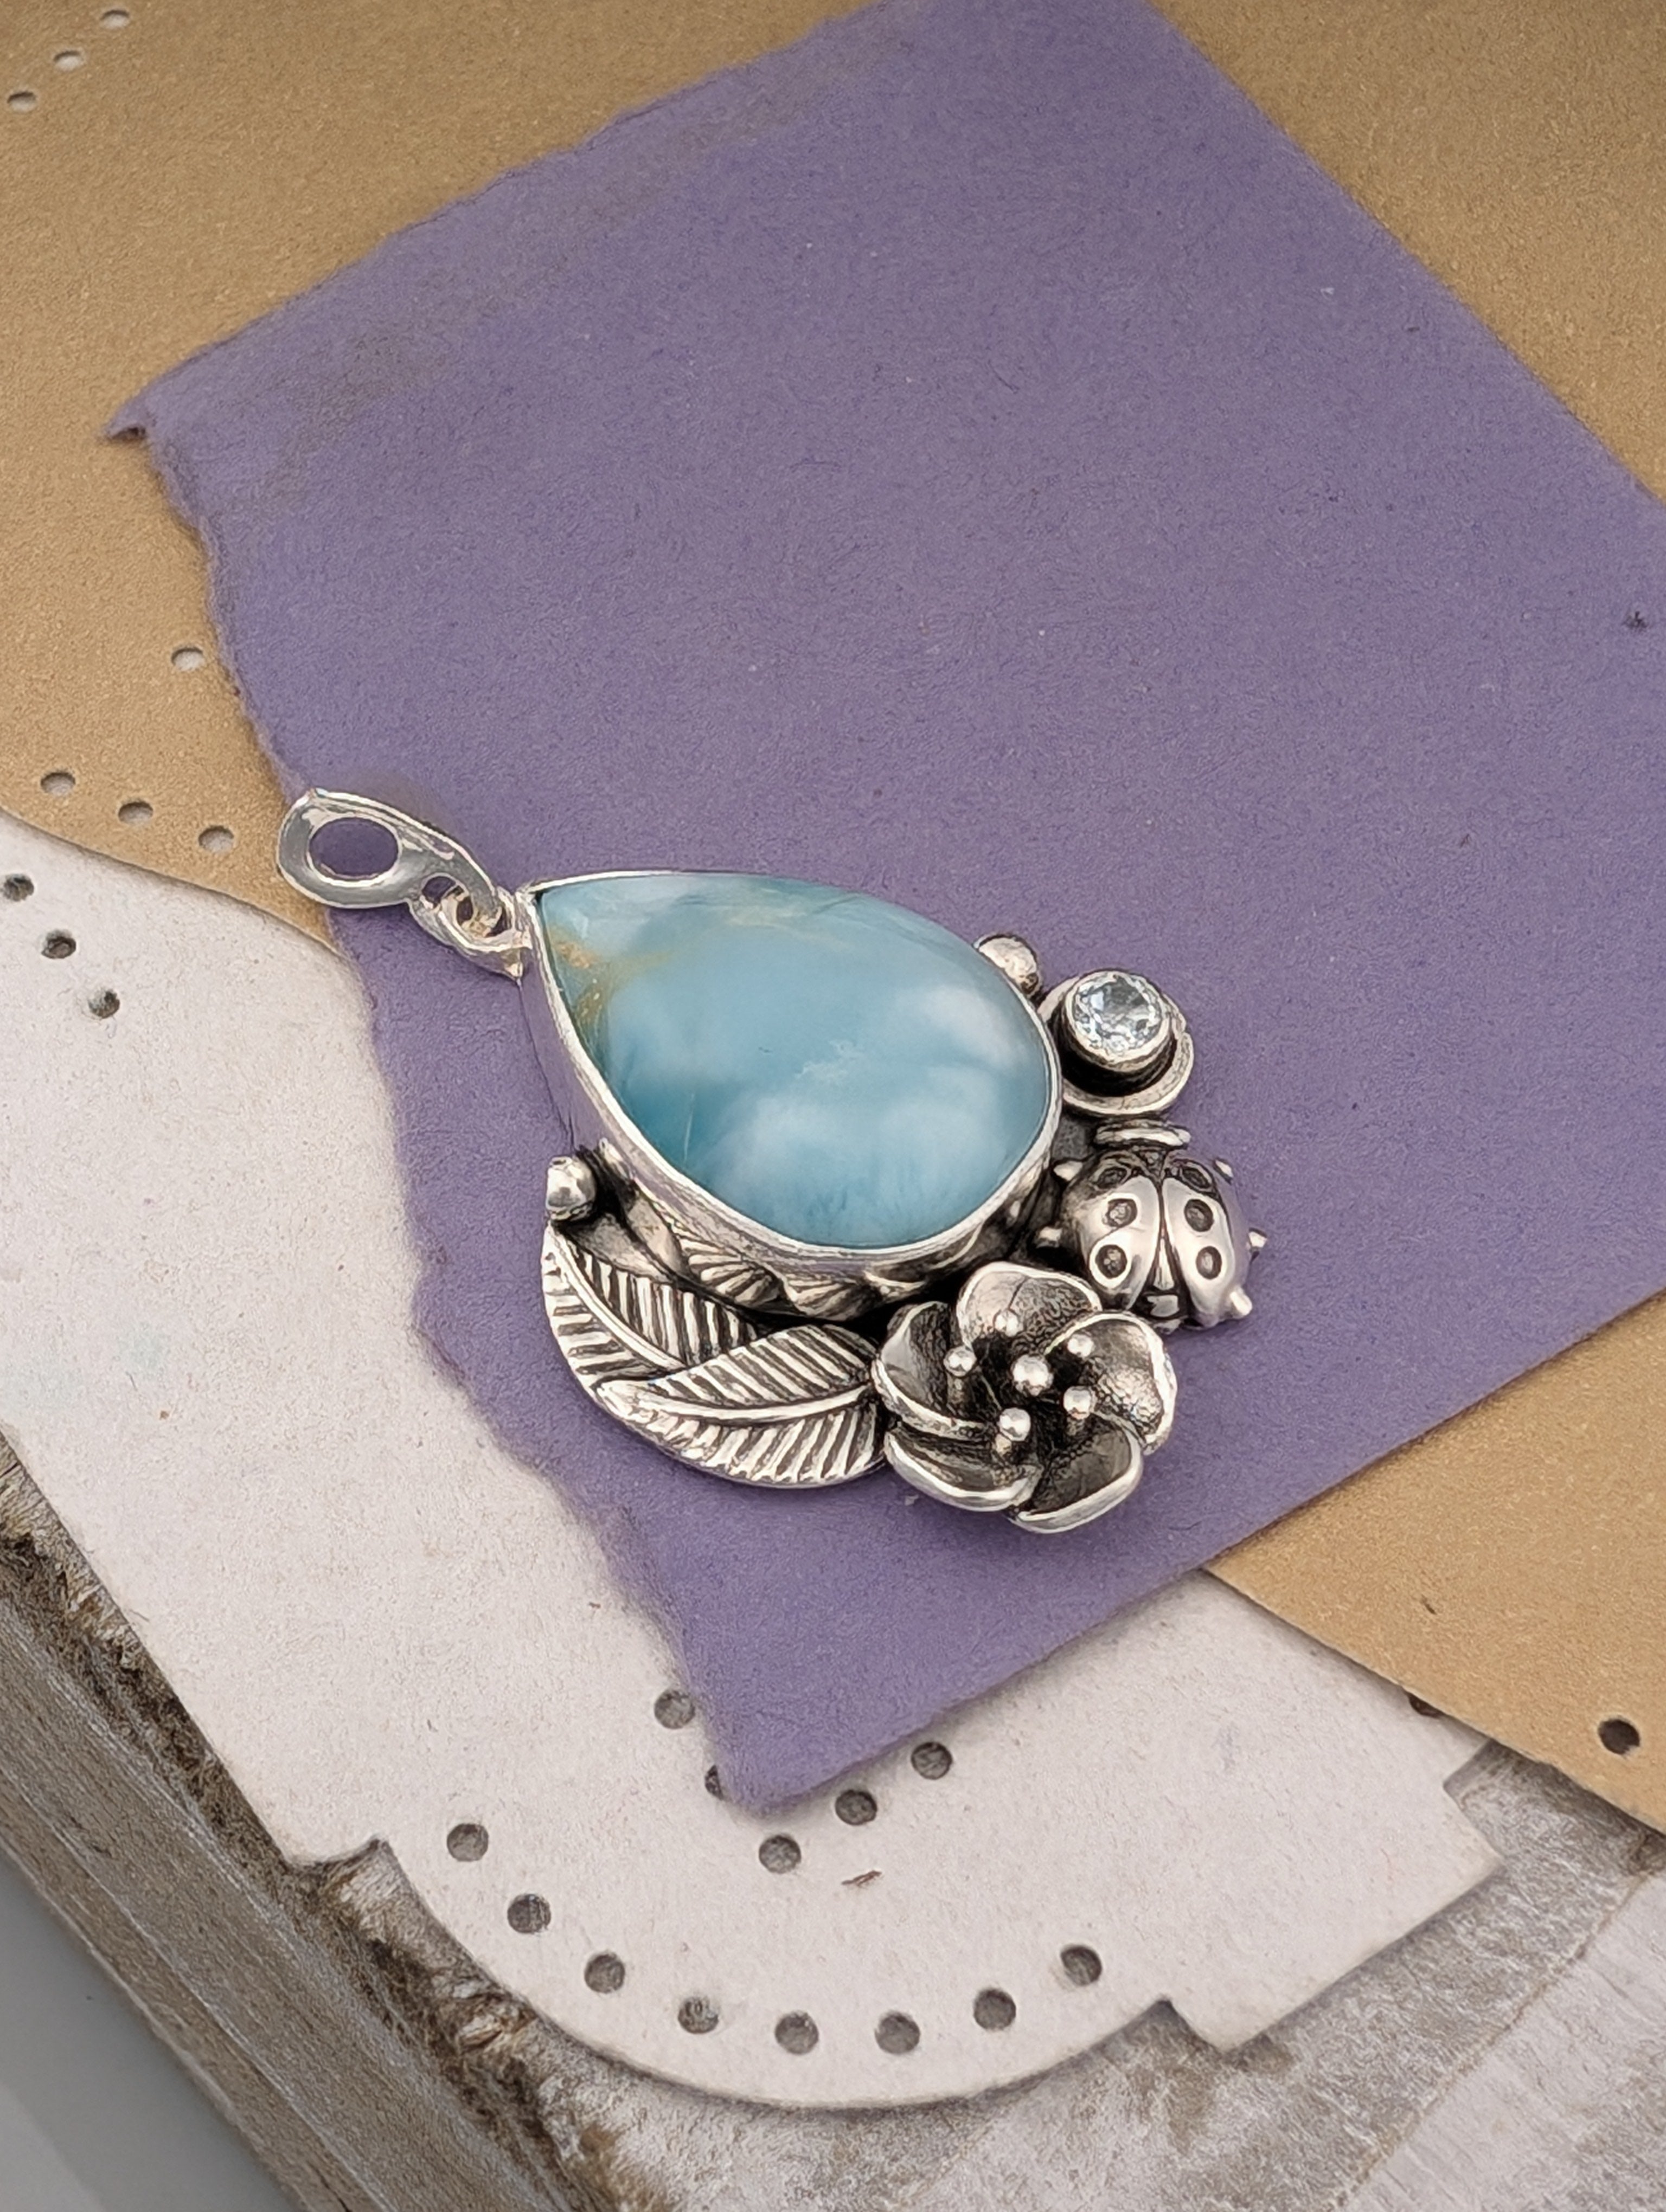 Larimar and Sky Blue Topaz Sterling Silver Pendant, #1